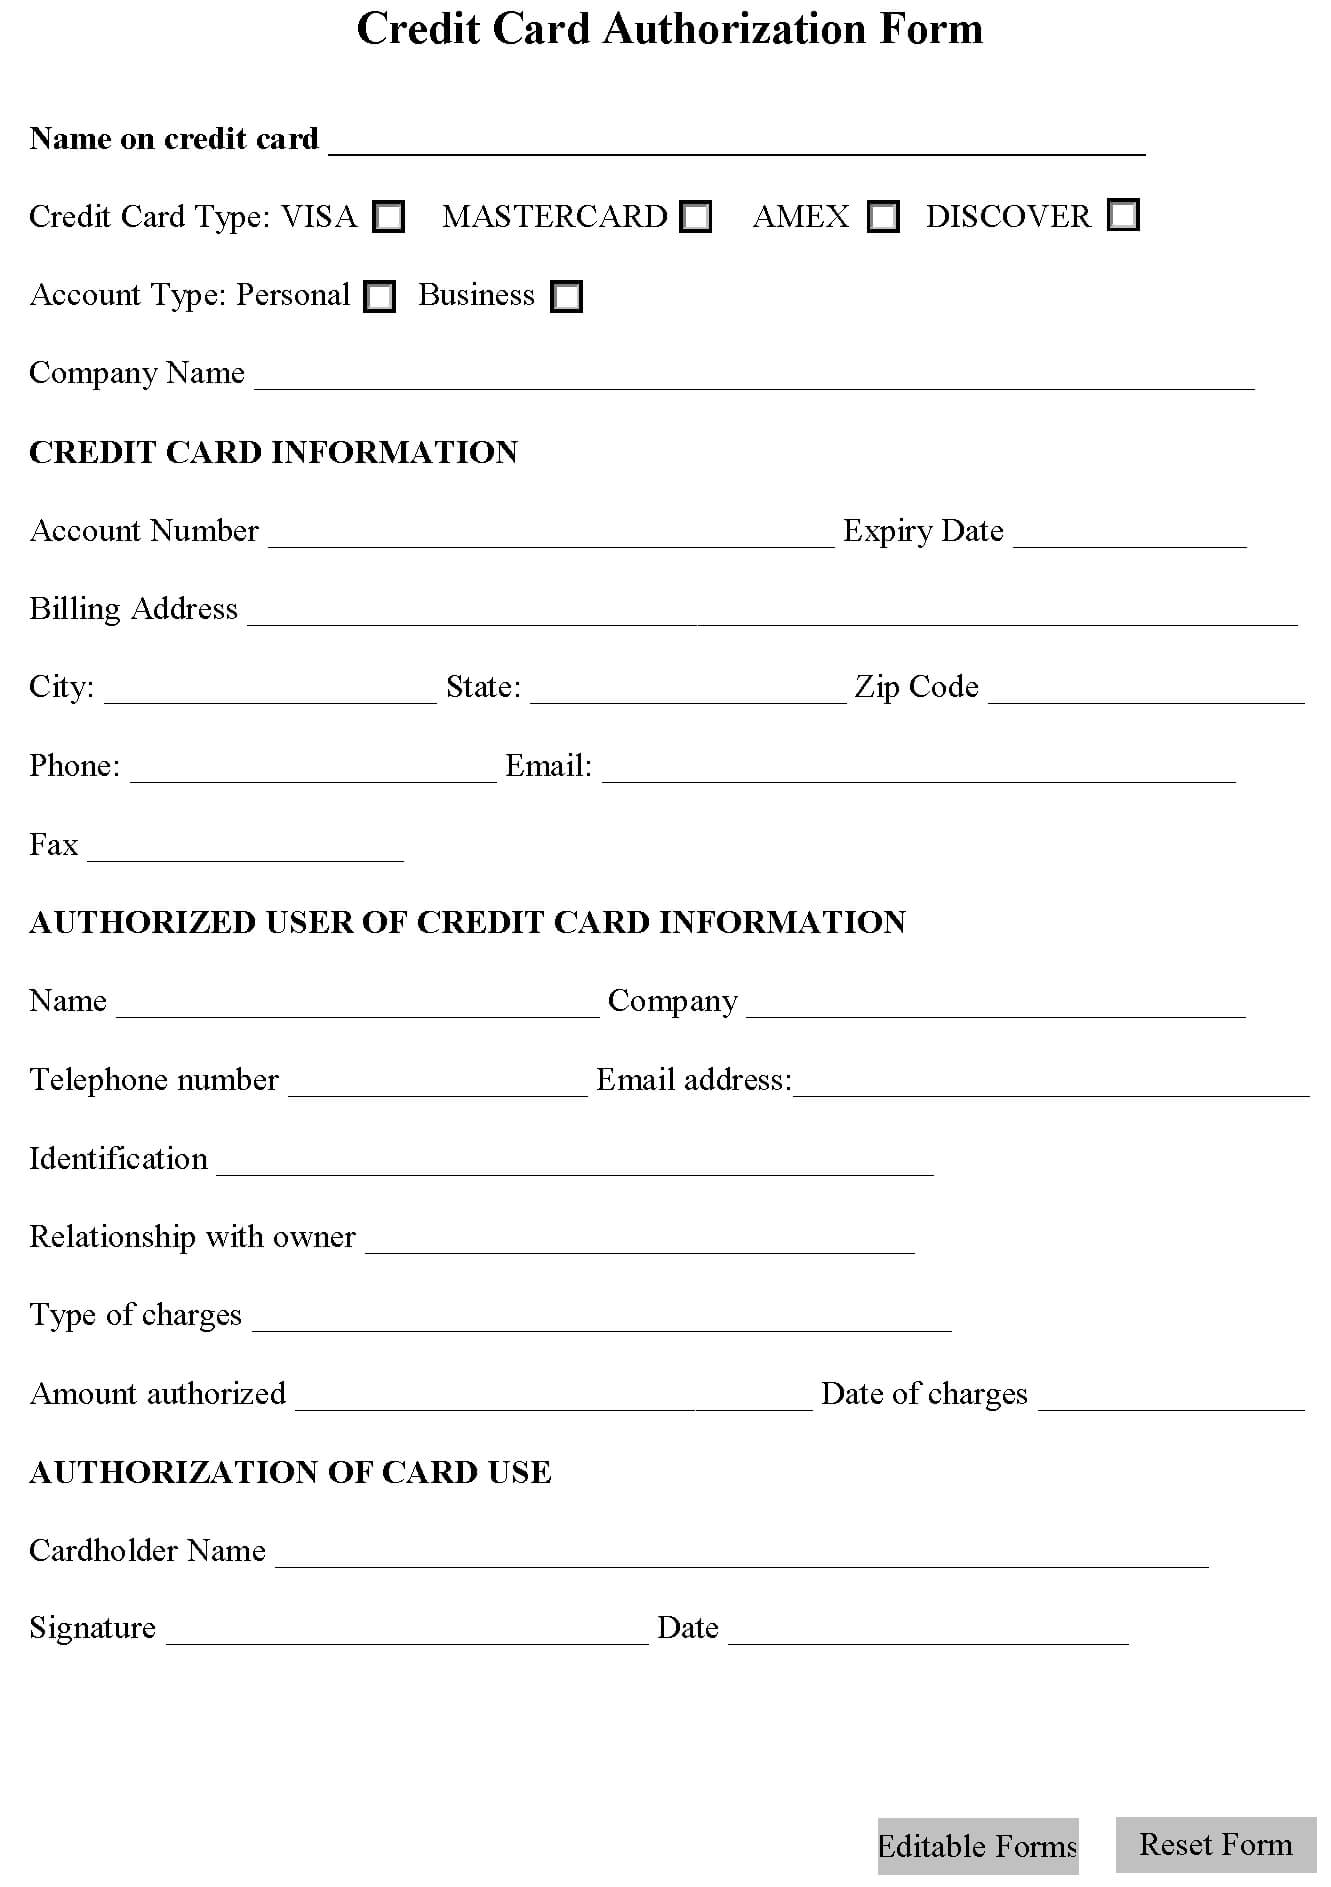 Credit Card Authorization Form | Editable Forms Within Credit Card Authorization Form Template Word